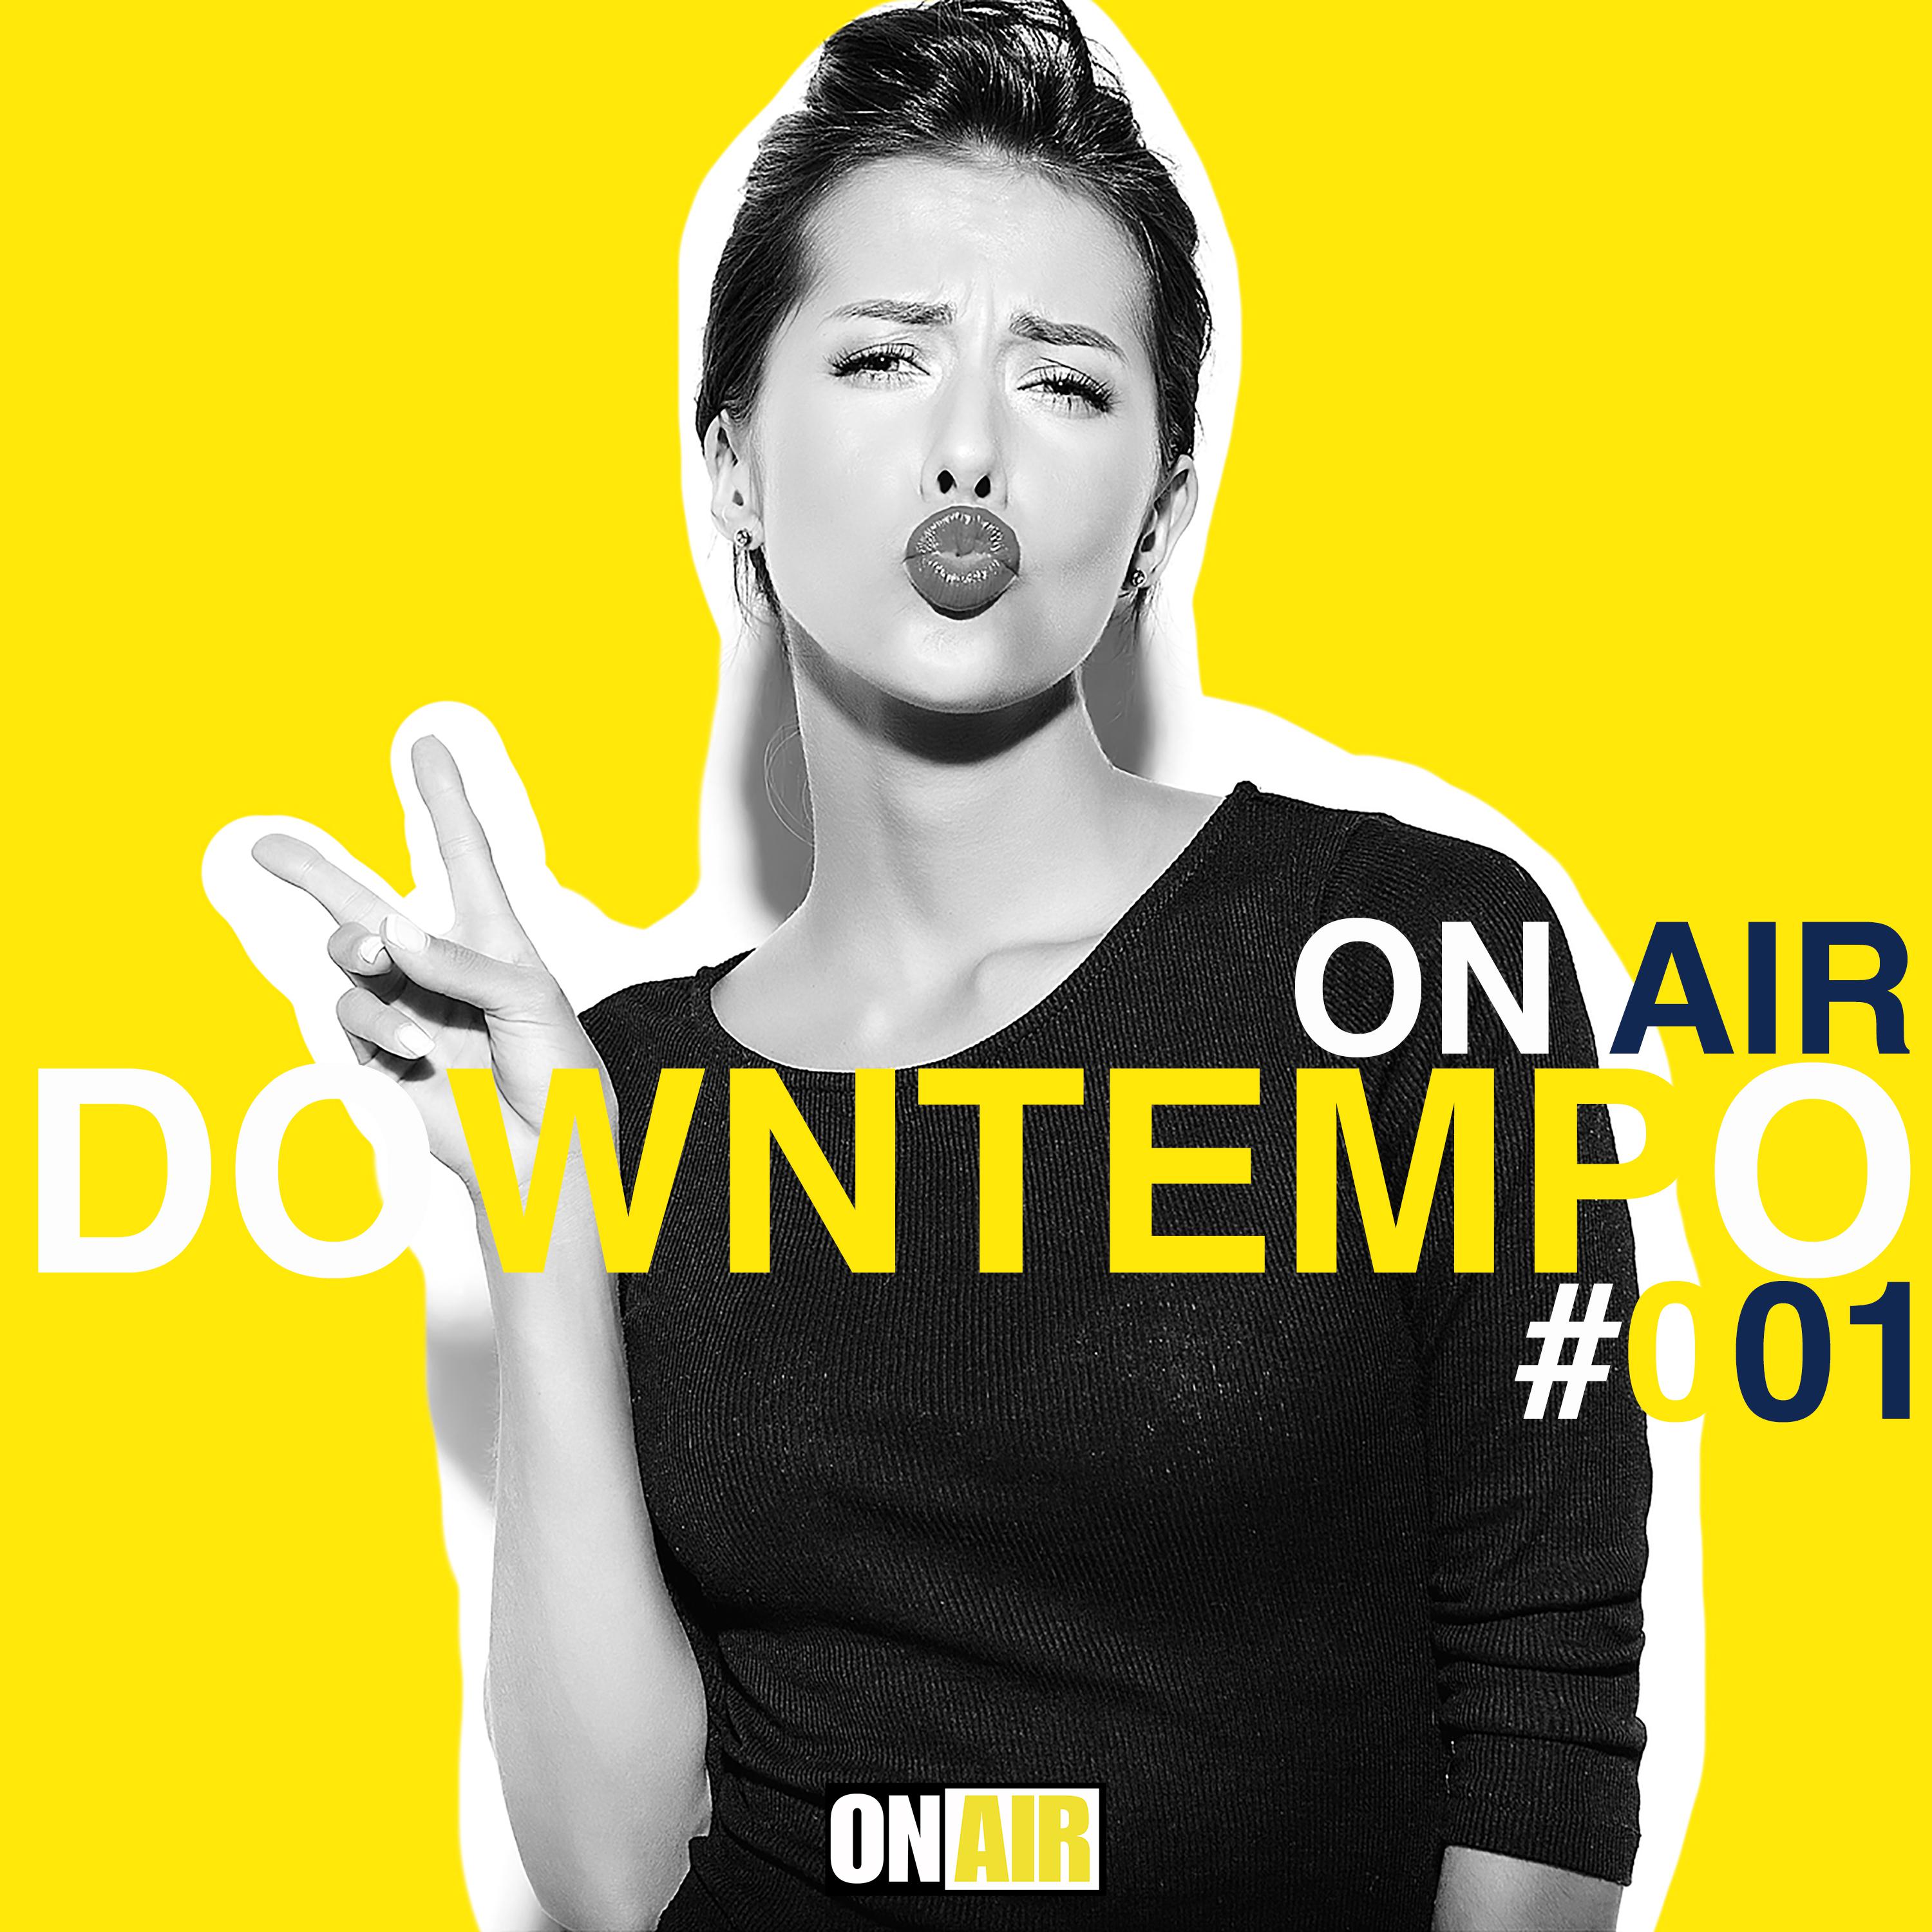 On Air Downtempo #001